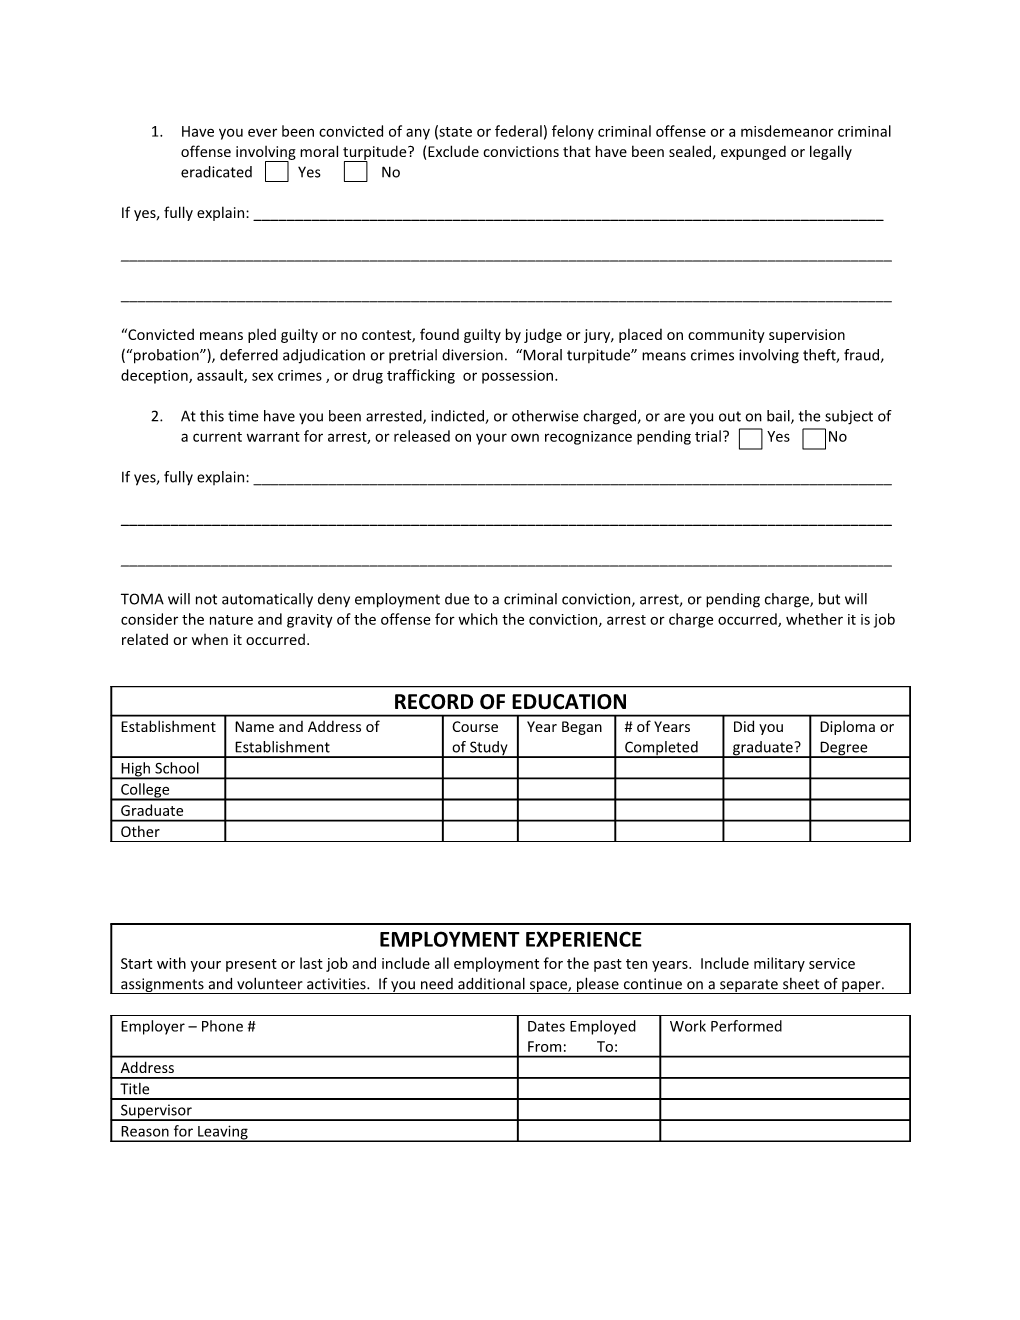 Texas Osteopathic Medical Association (Toma) Employment Application